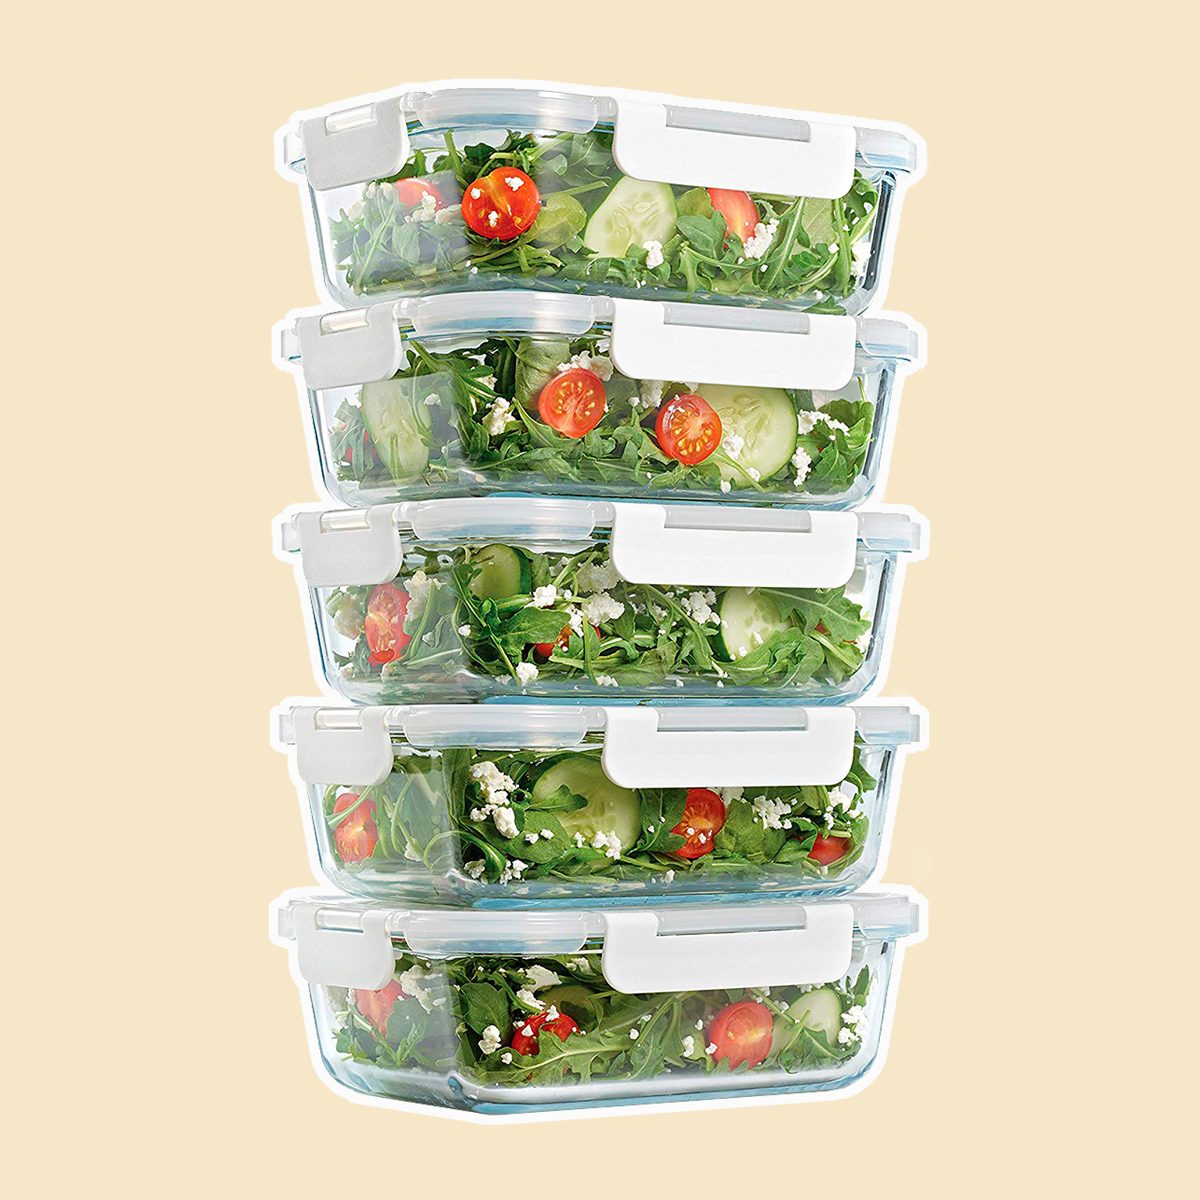 https://www.tasteofhome.com/wp-content/uploads/2020/03/Fit-Fresh-Glass-Containers.jpg?fit=700%2C700